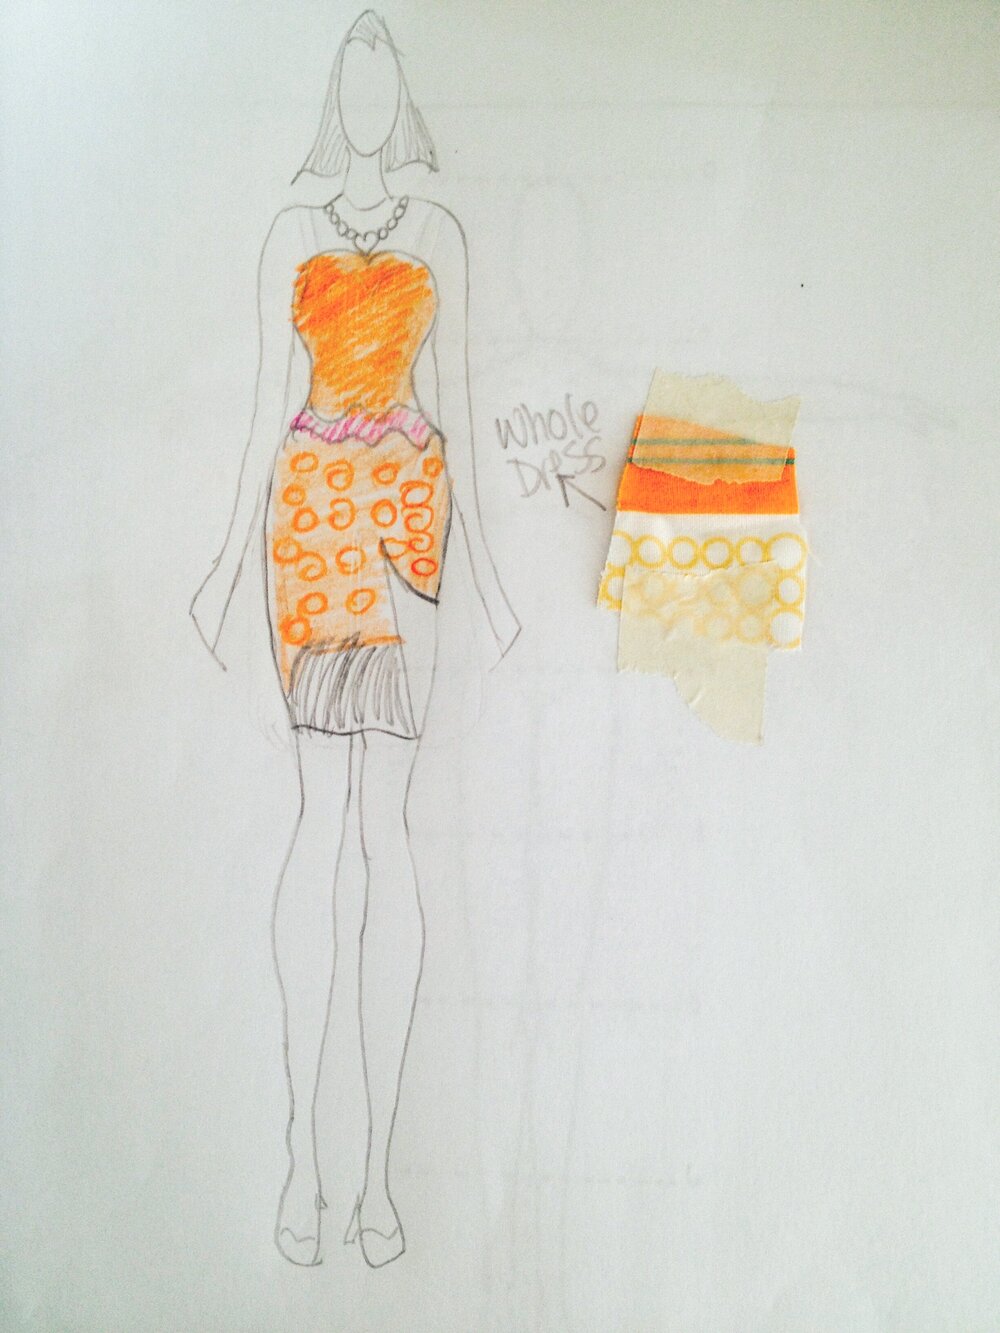 Mannequin Template for Fashion Design Inspirational Fashion